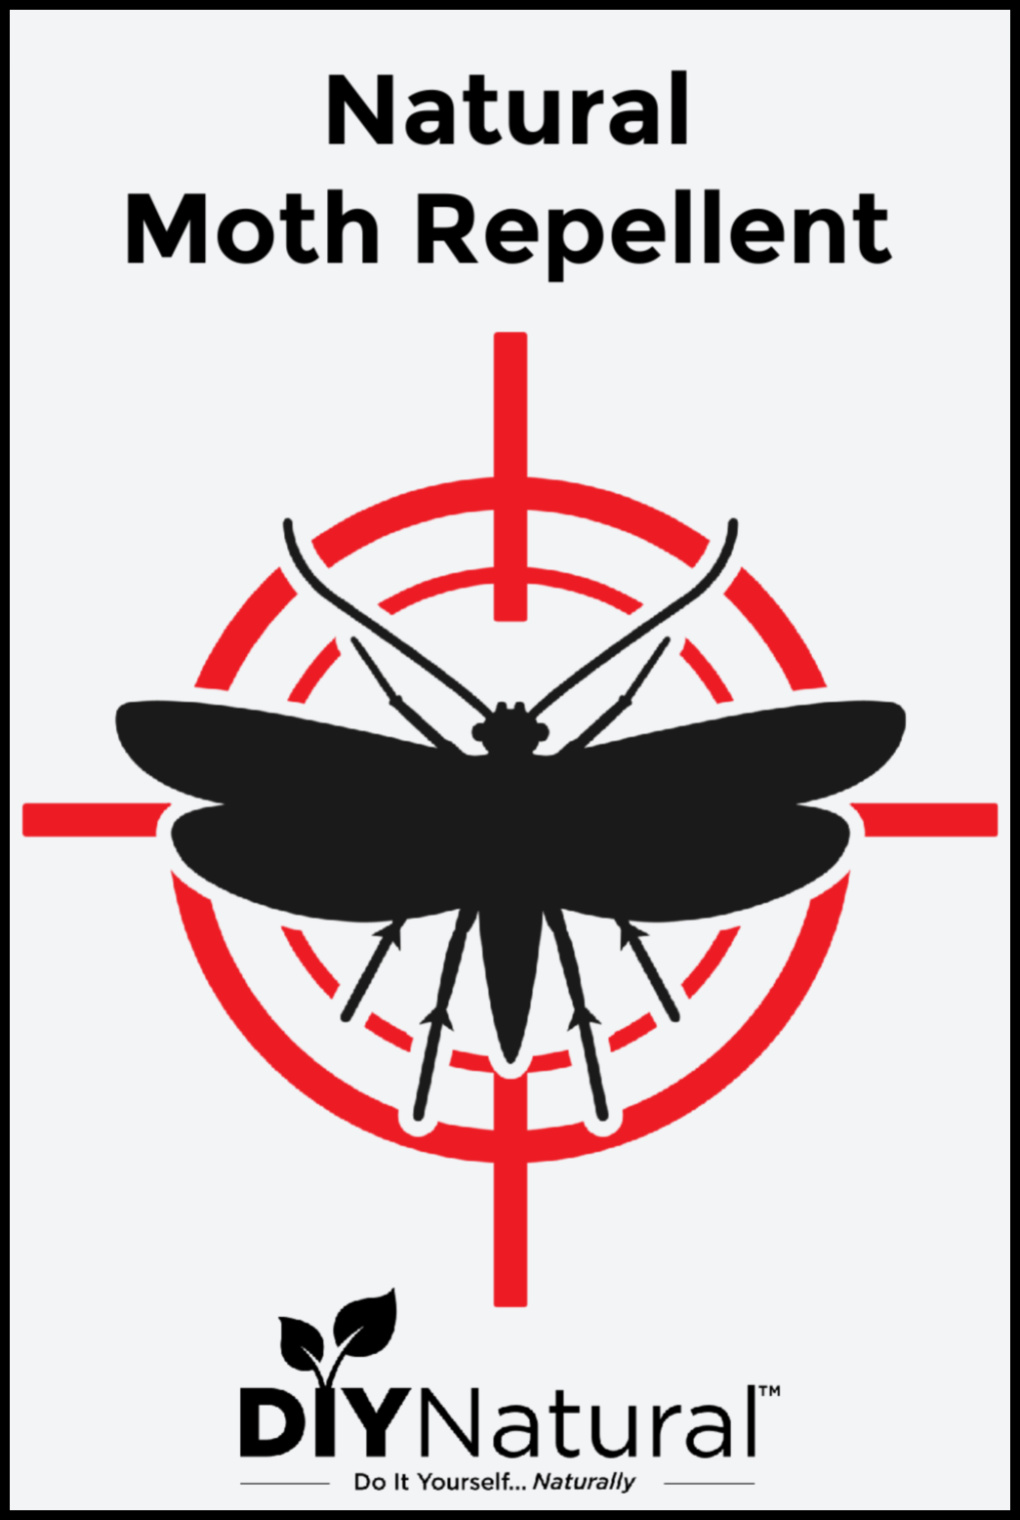 Moth Repellent: Natural Homemade Solutions Without Stinky Chemicals